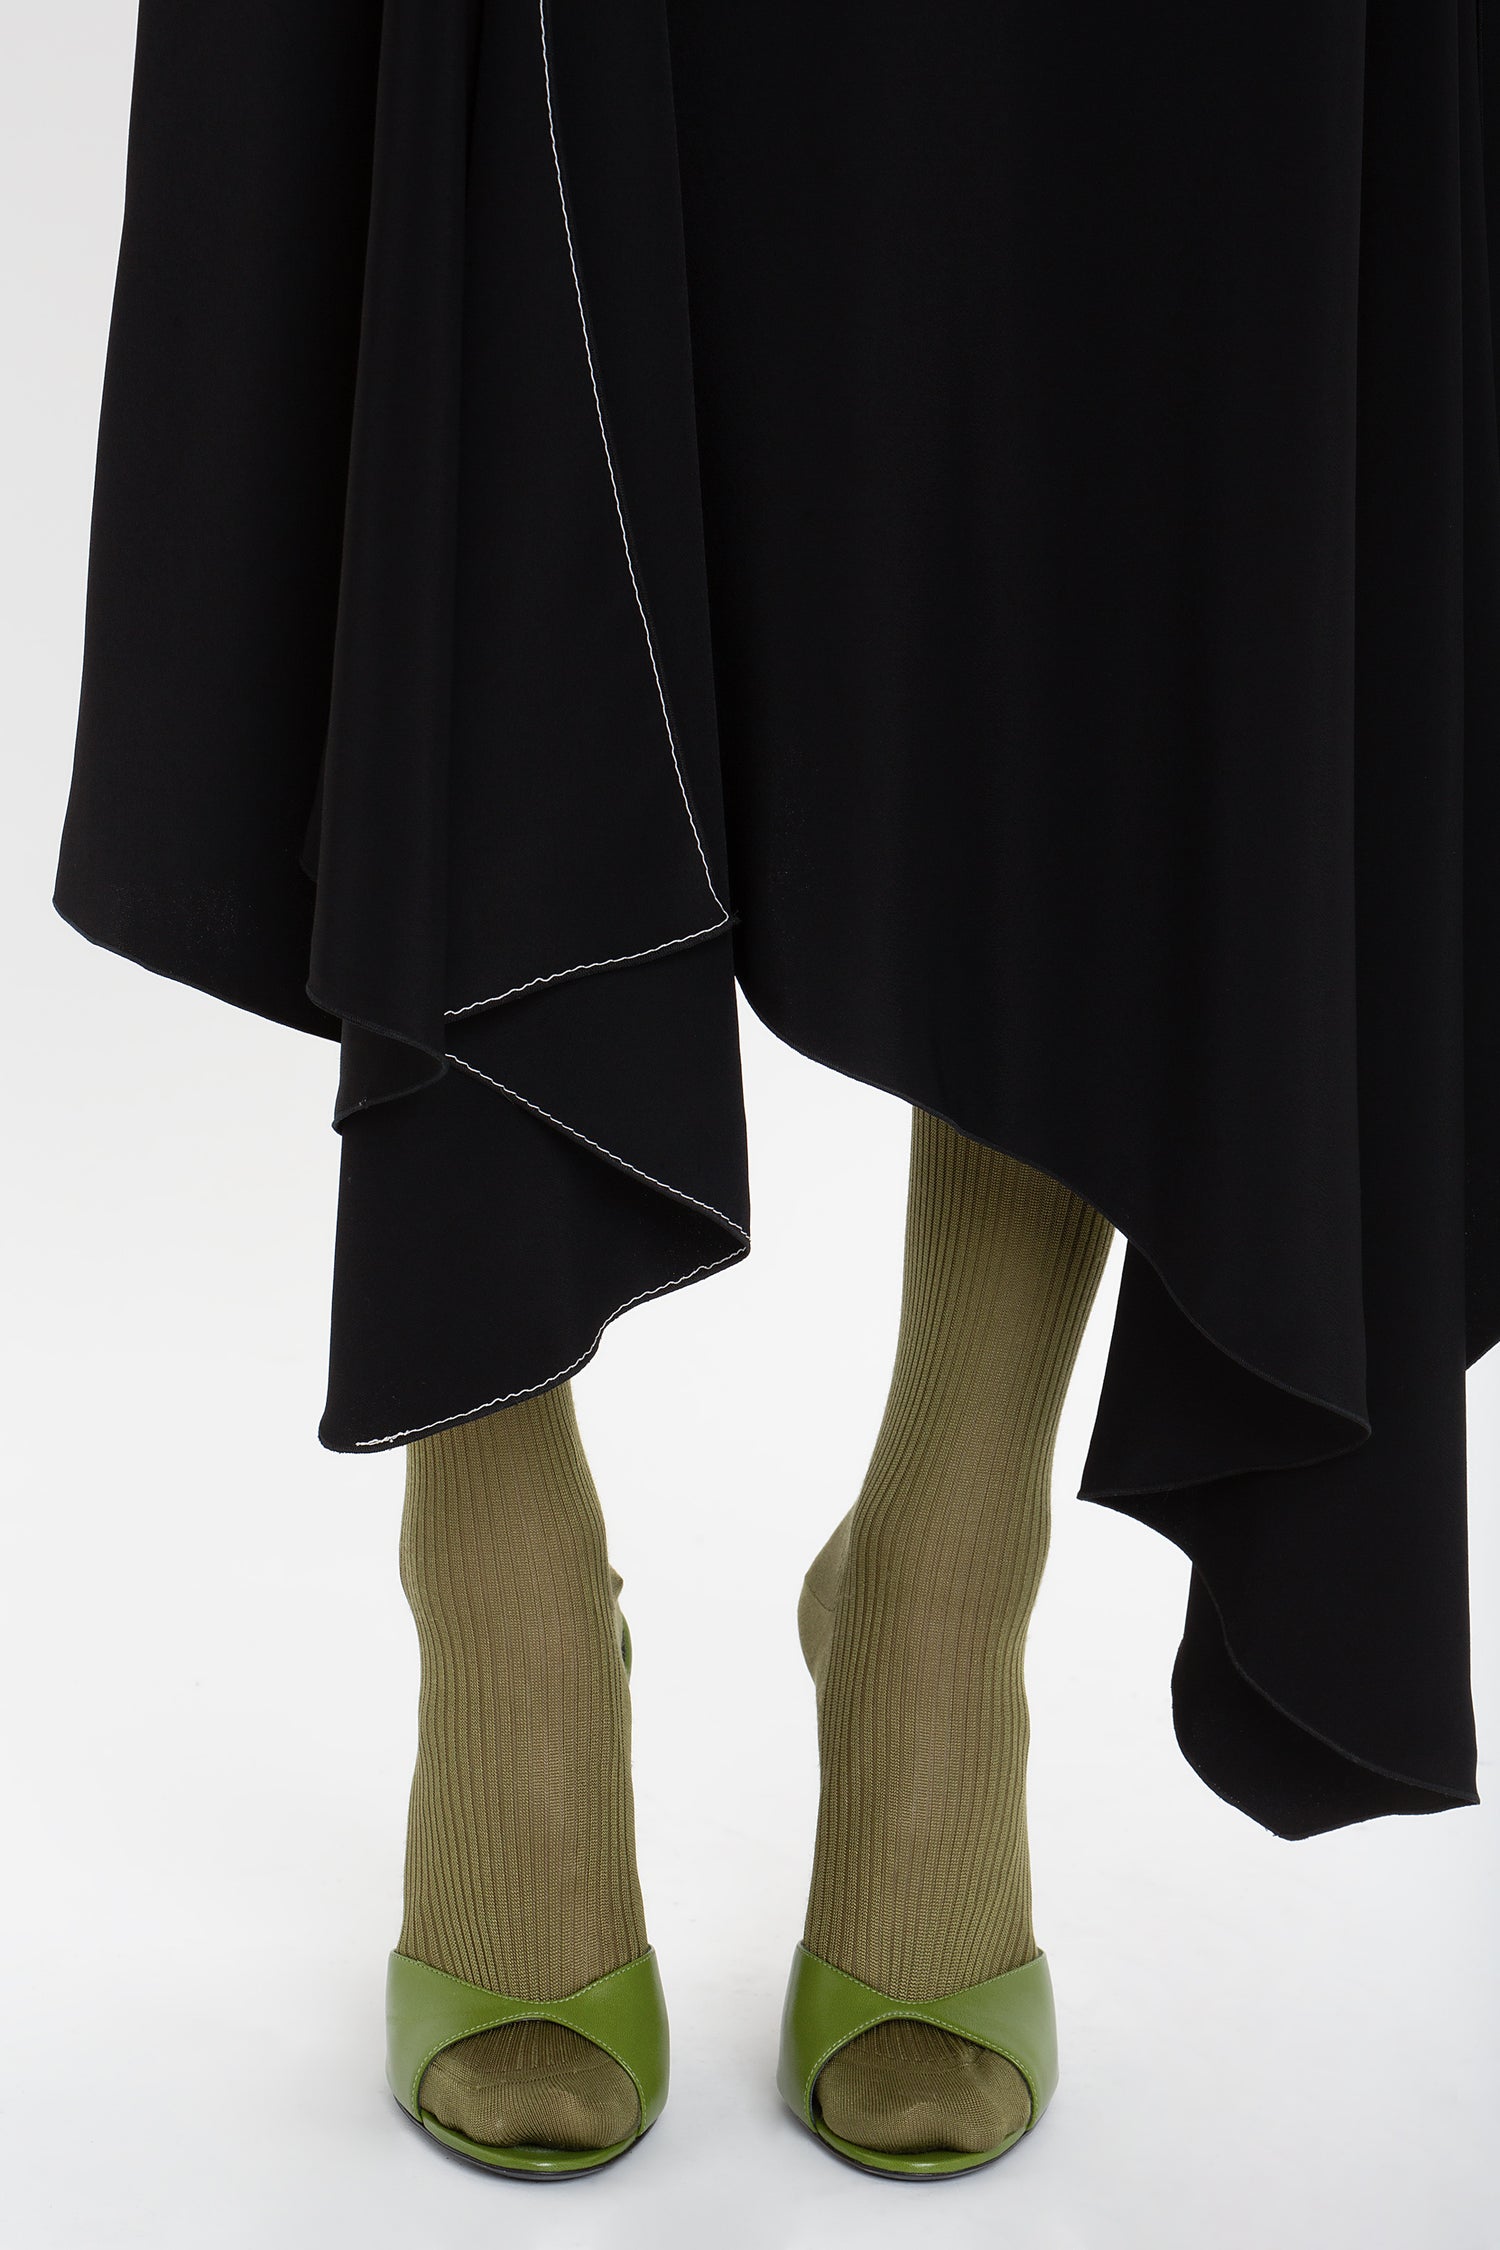 A person wearing a Henley Shirt Dress In Black by Victoria Beckham with an uneven hem and olive-green ribbed socks, paired with olive-green open-toed heels, stands against a white background. The outfit subtly incorporates elements like an asymmetric waist seam that adds a contemporary twist.